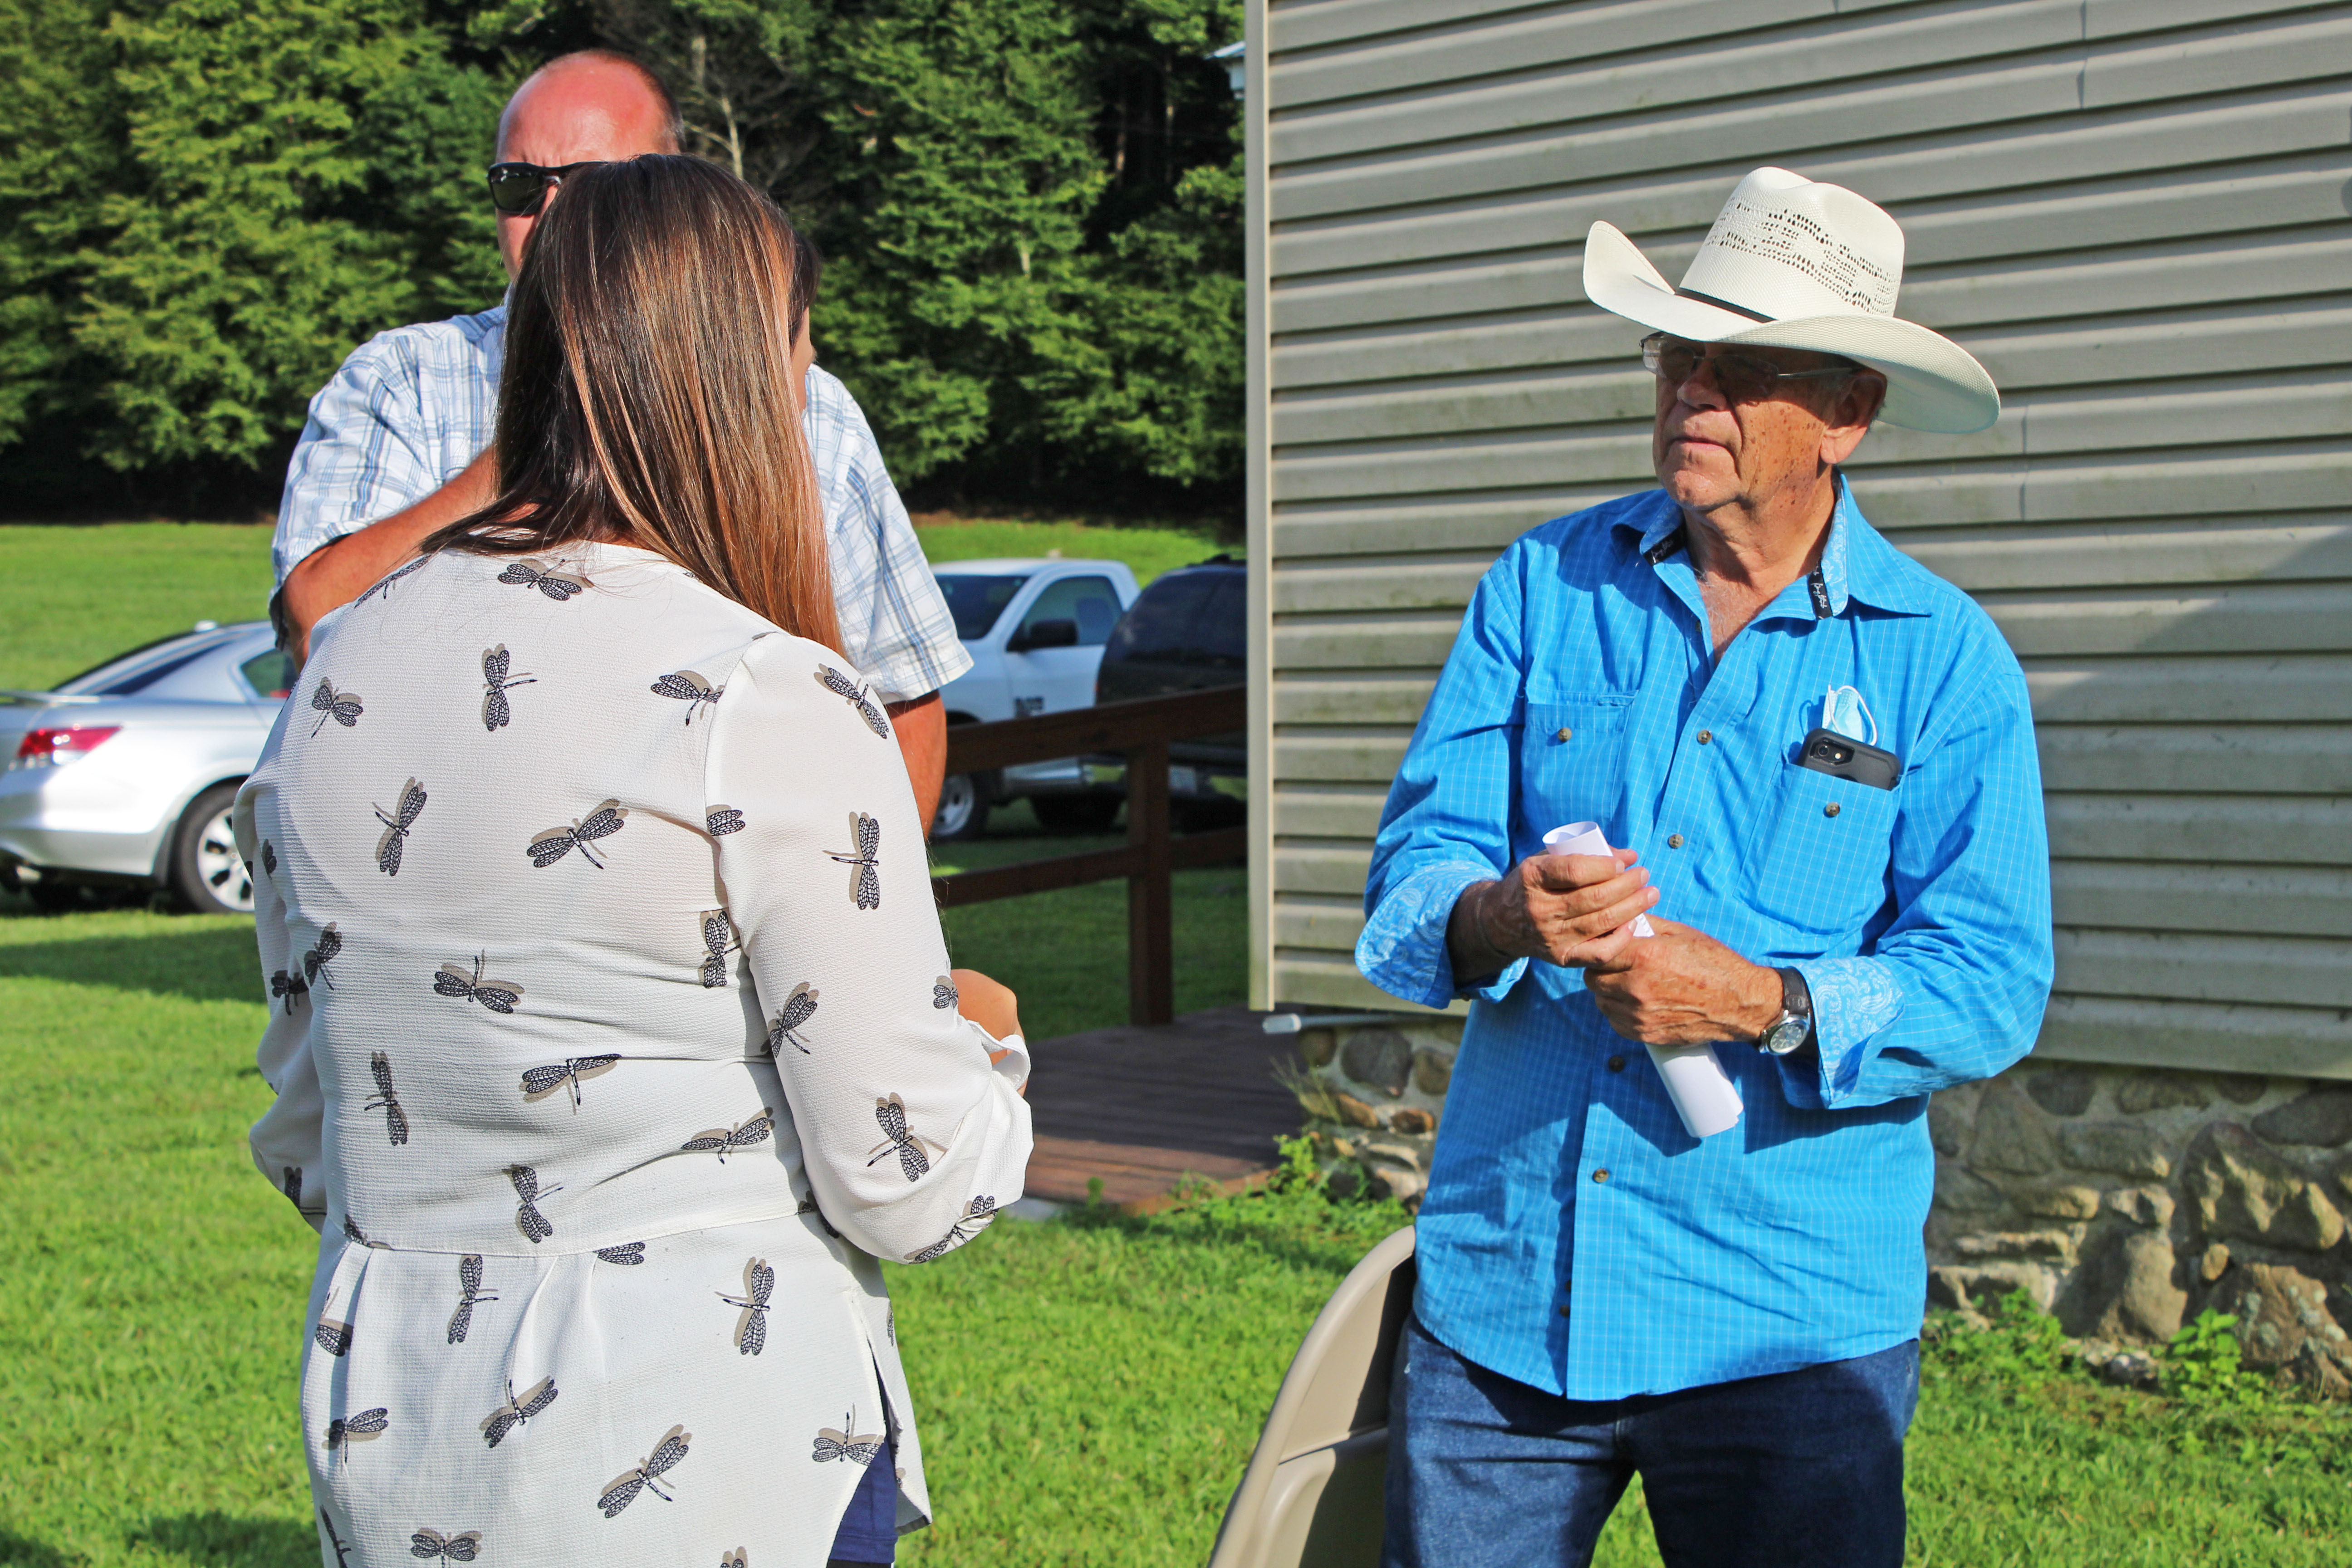 Halley Burleson speaks with a local Poplar resident before special meeting Tuesday, Aug. 25. (MNJ Photo/Juliana Walker)